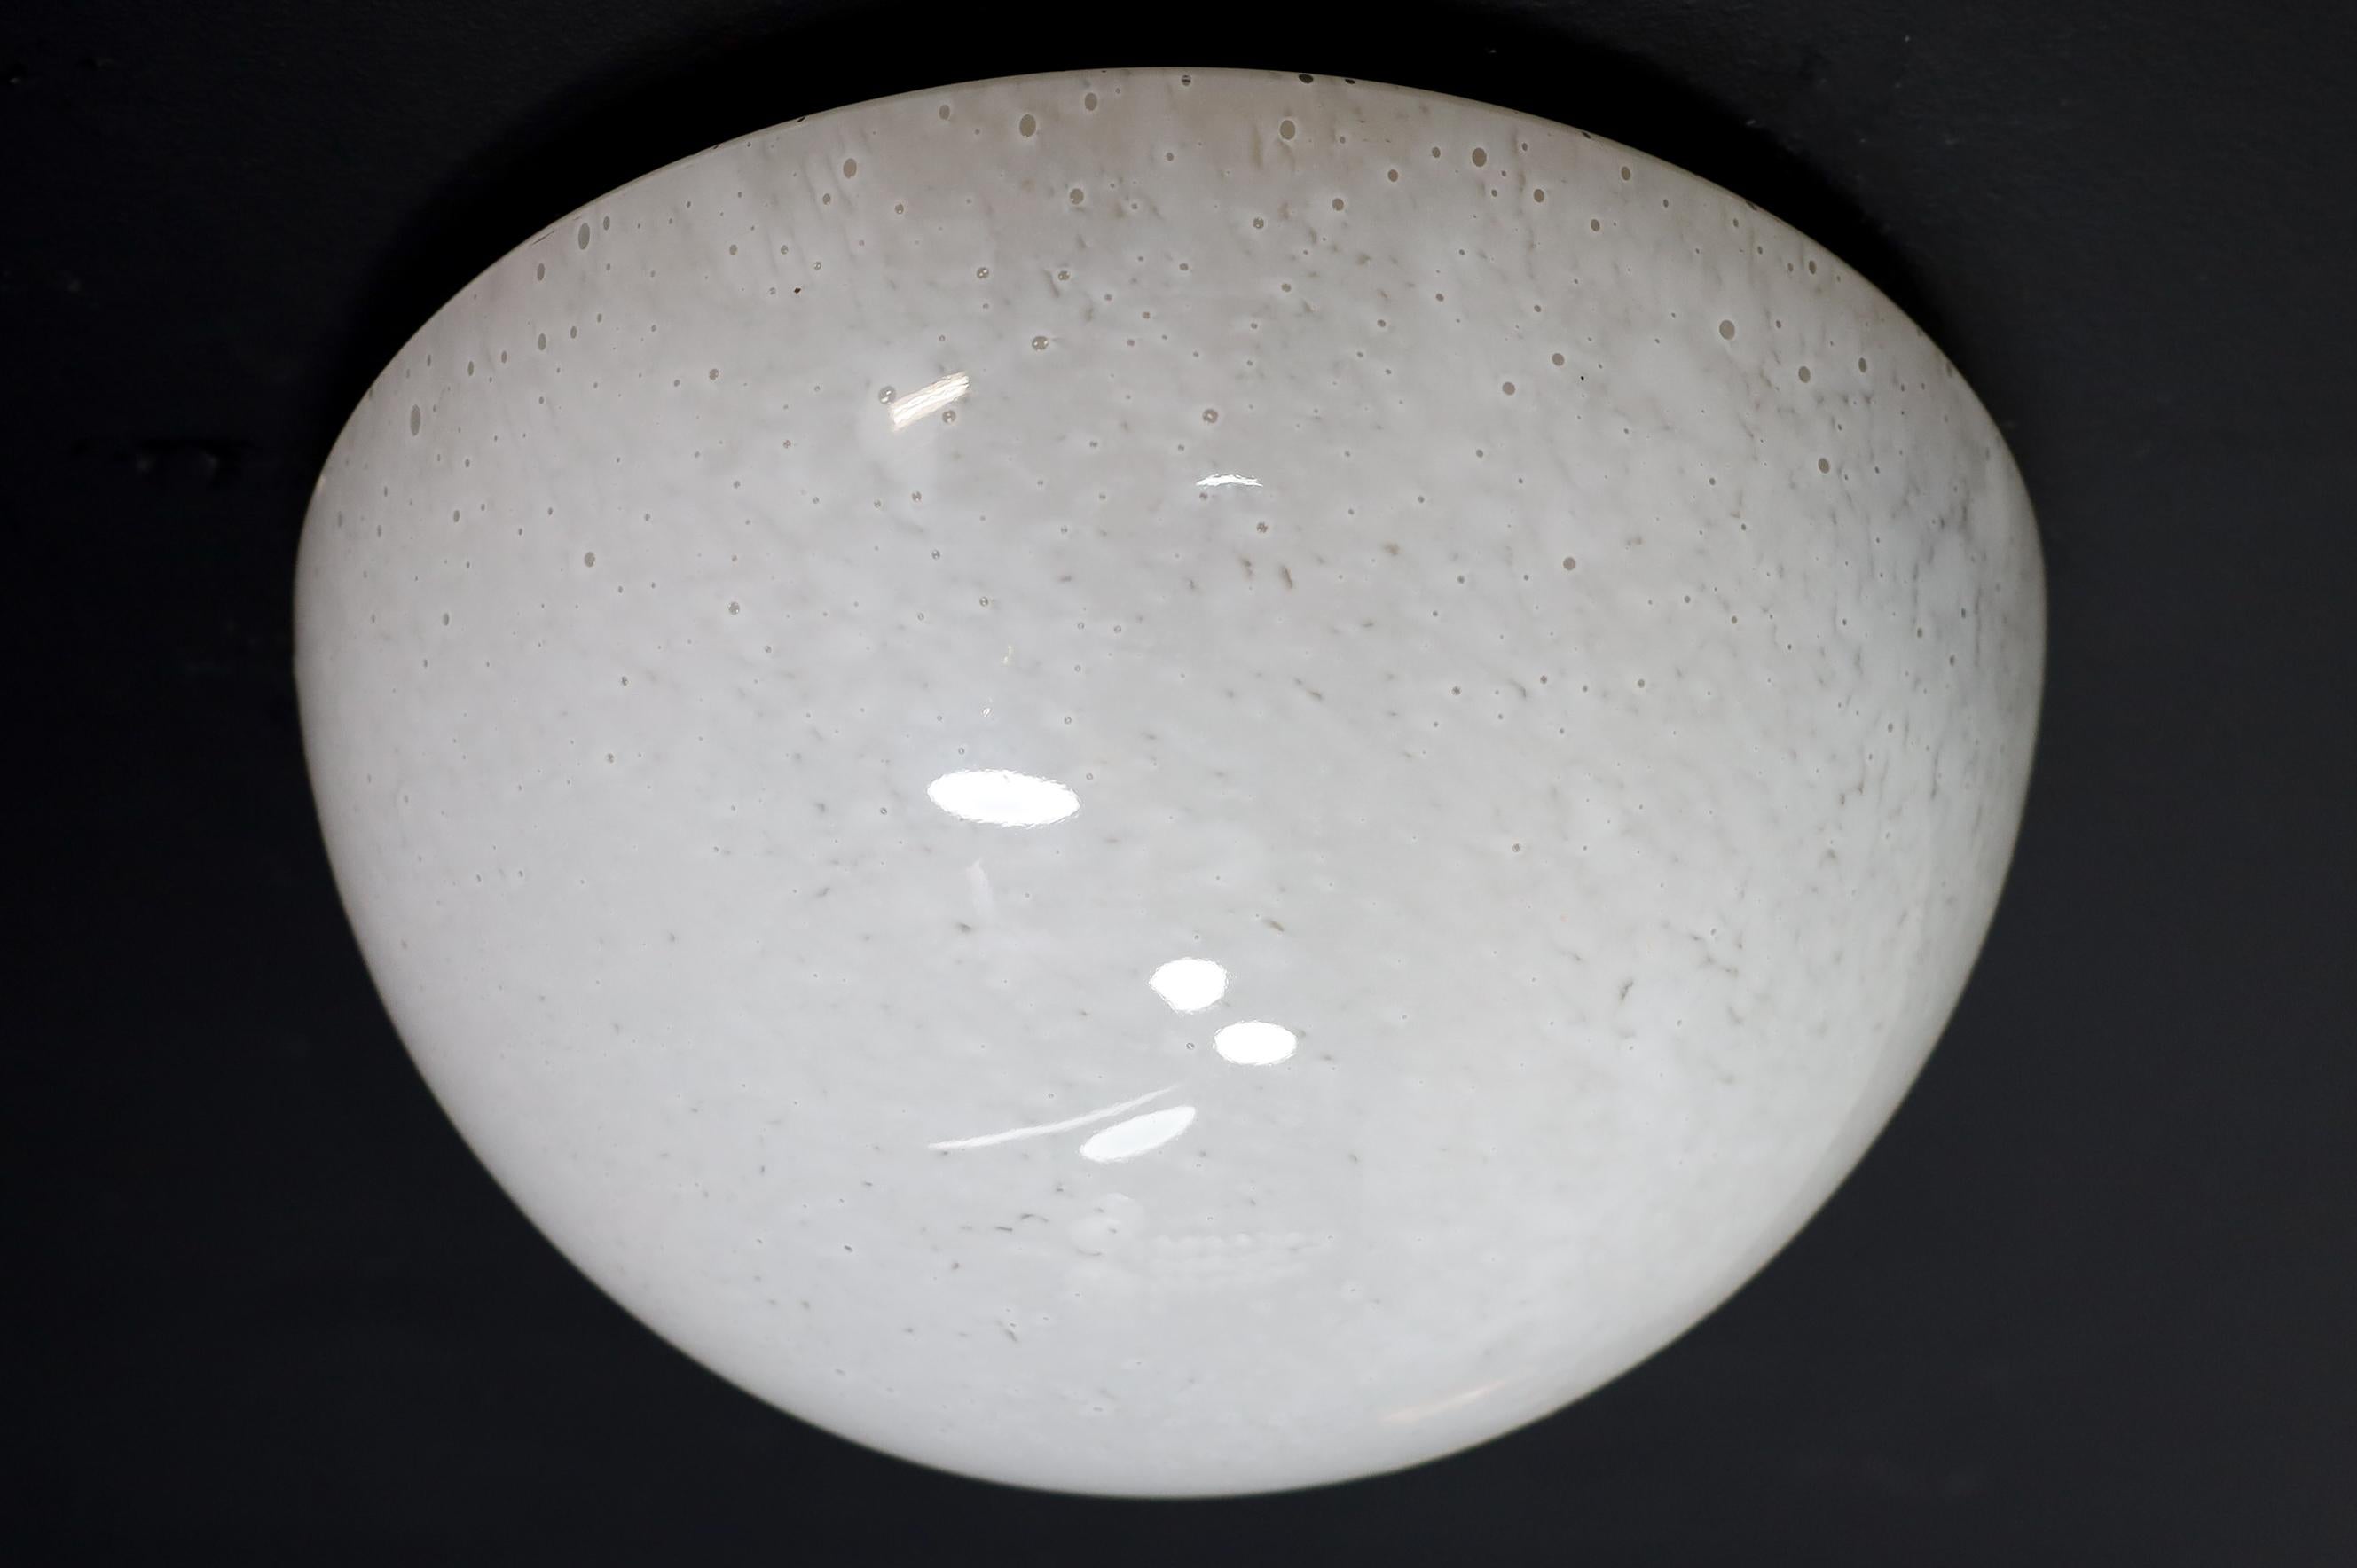 Large Glashütte Limburg Frosted glass ceiling lights or sconces, Germany 1970s

A set of excellent large domed-shaped ceiling lights or sconces by the esteemed Glashütte Limburg factory in Germany circa 1970. It is composed of a domed shape